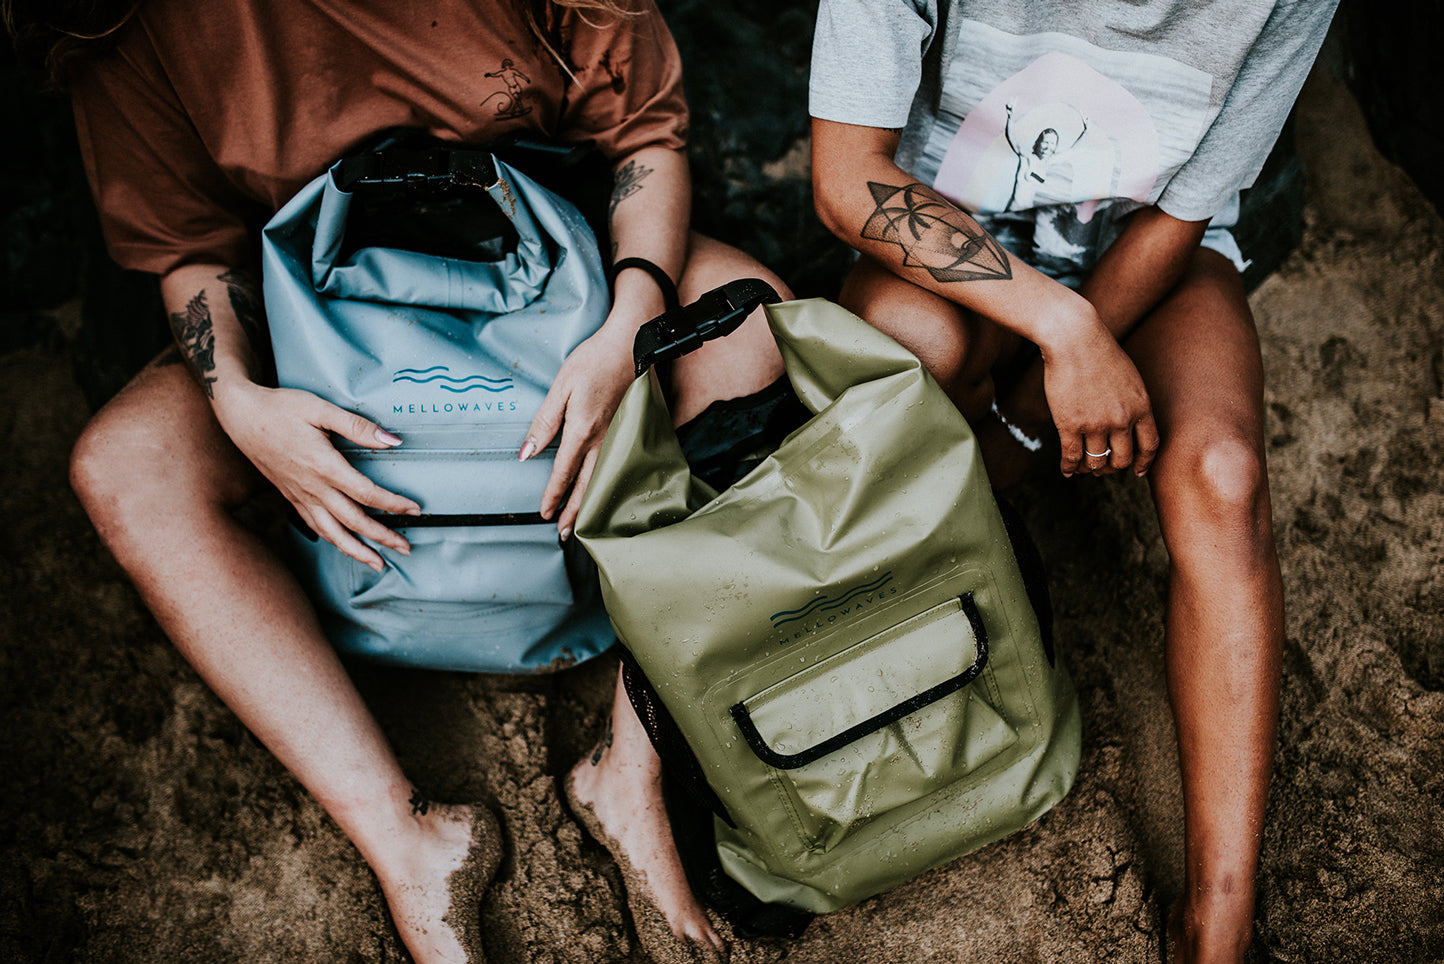 MILITARY GREEN MELLOW BACKPACK